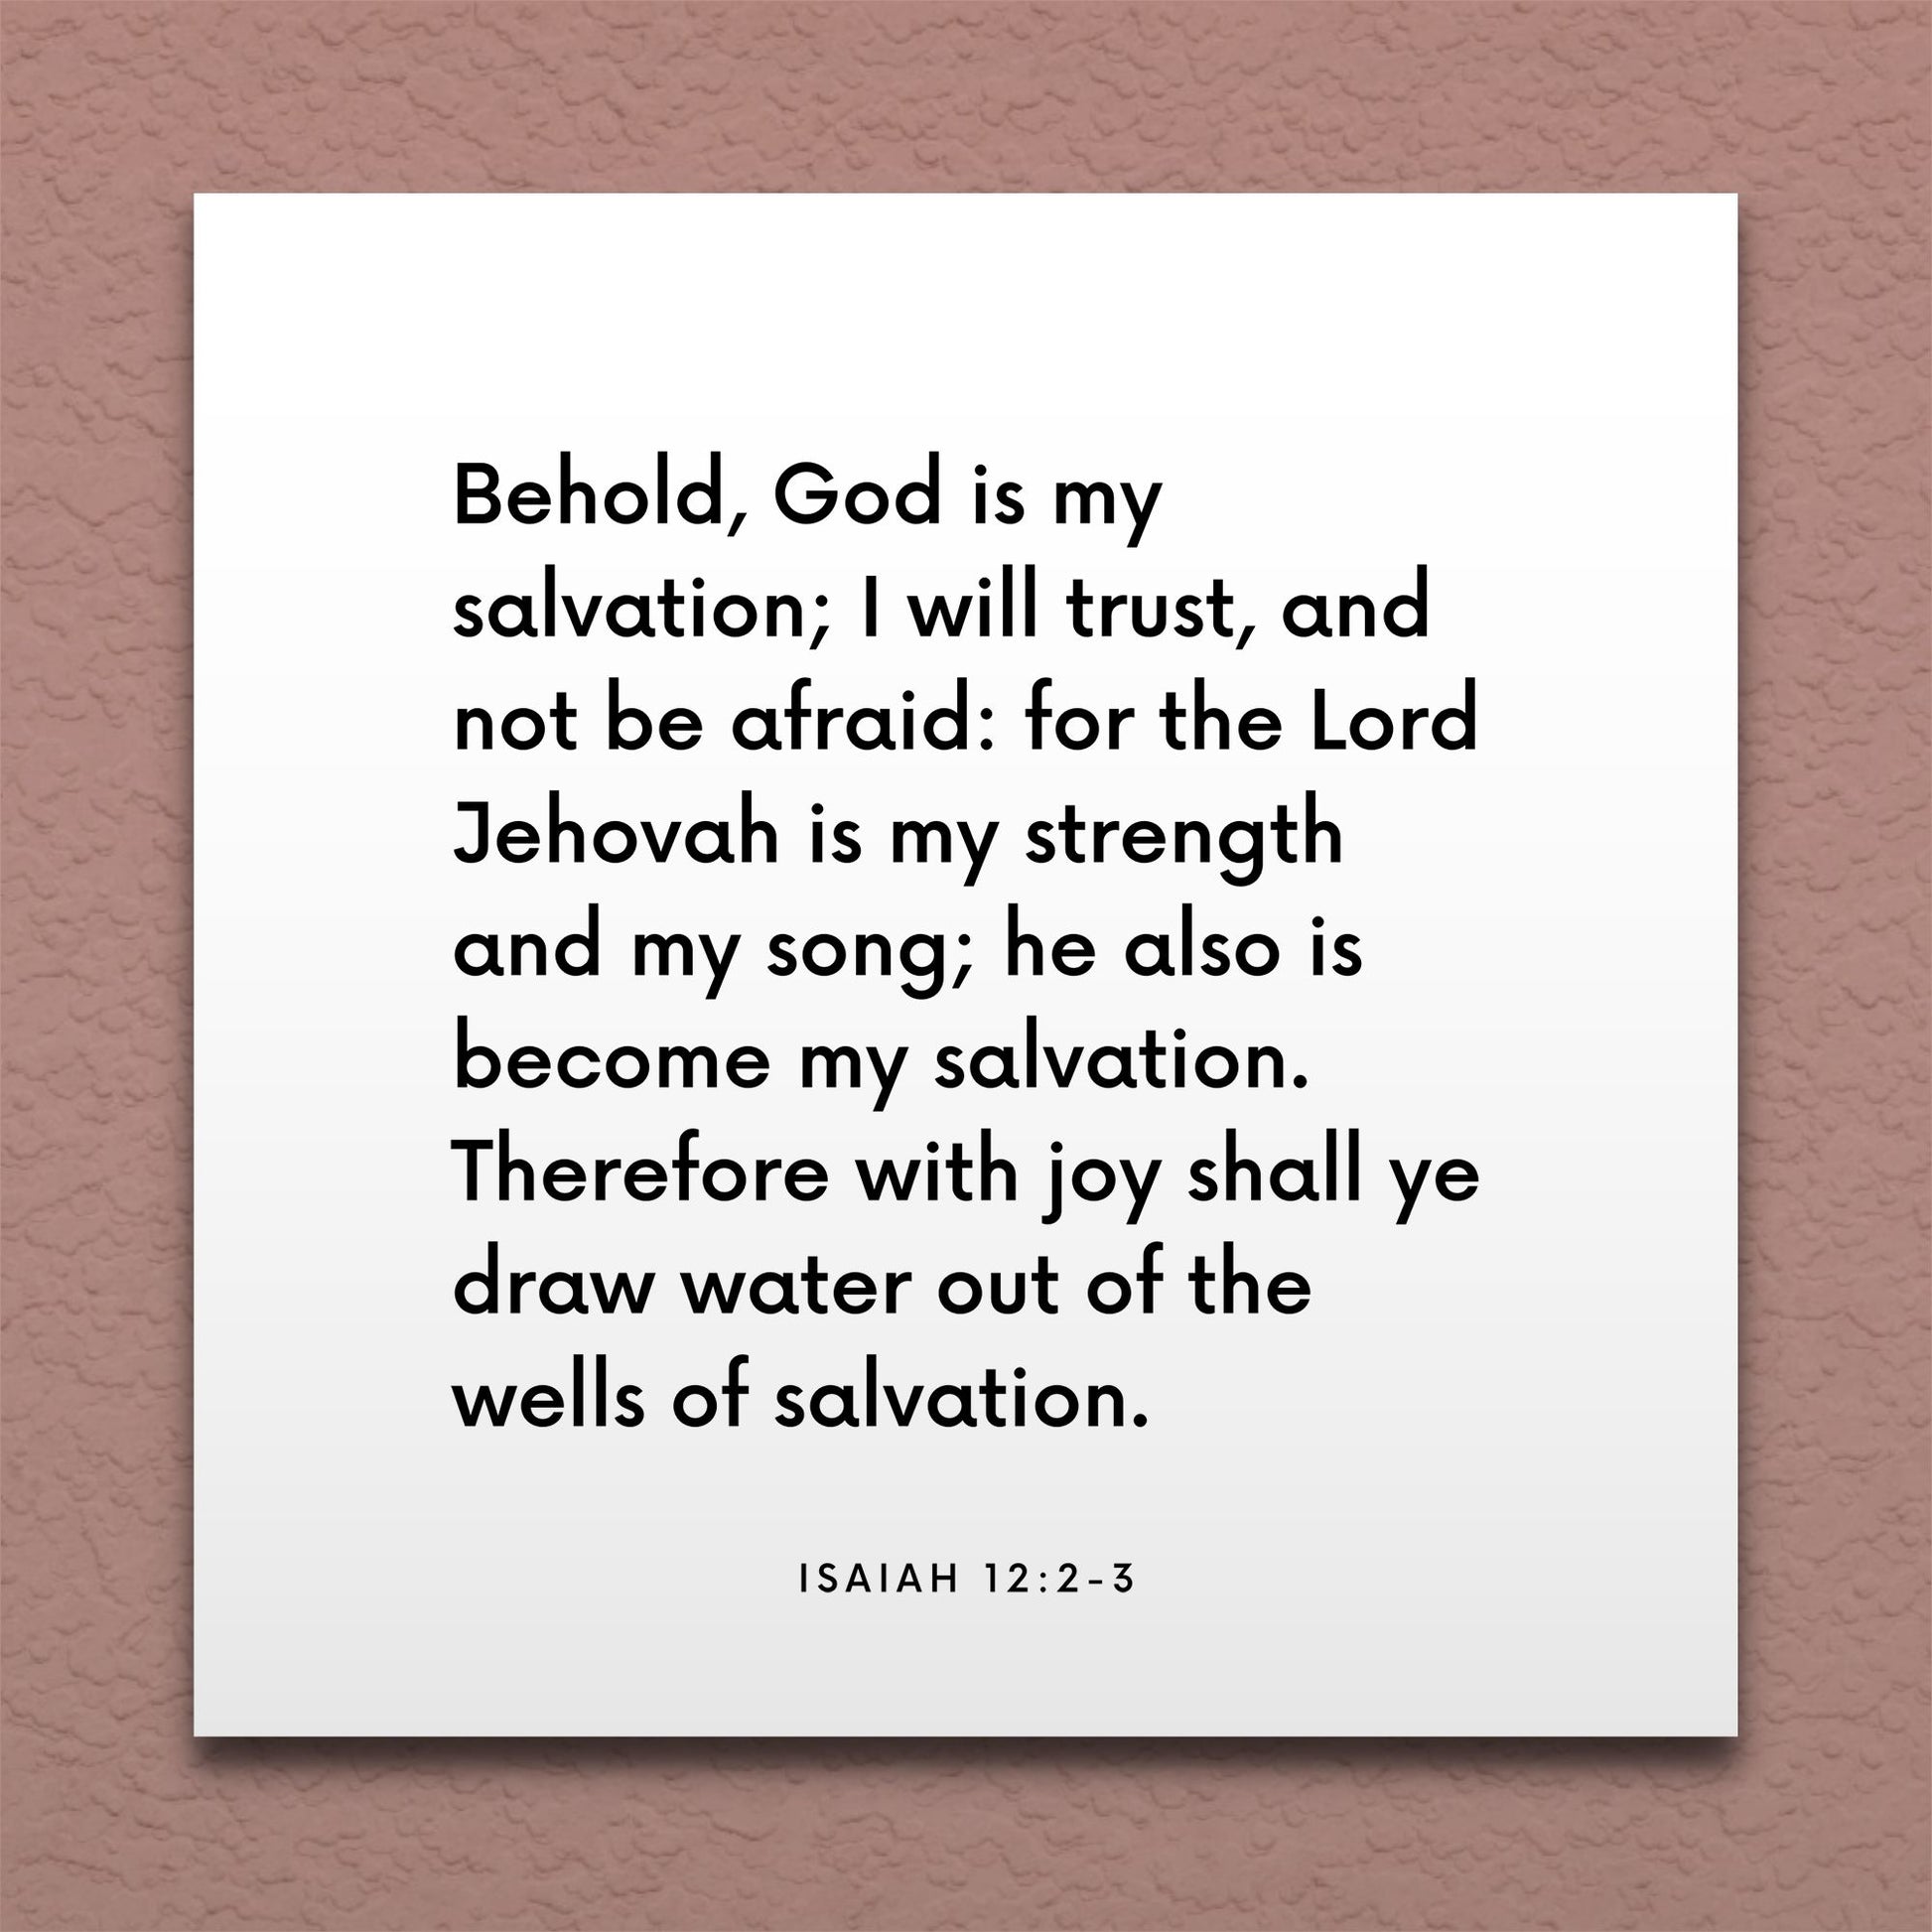 Wall-mounted scripture tile for Isaiah 12:2-3 - "The Lord Jehovah is my strength and my song"